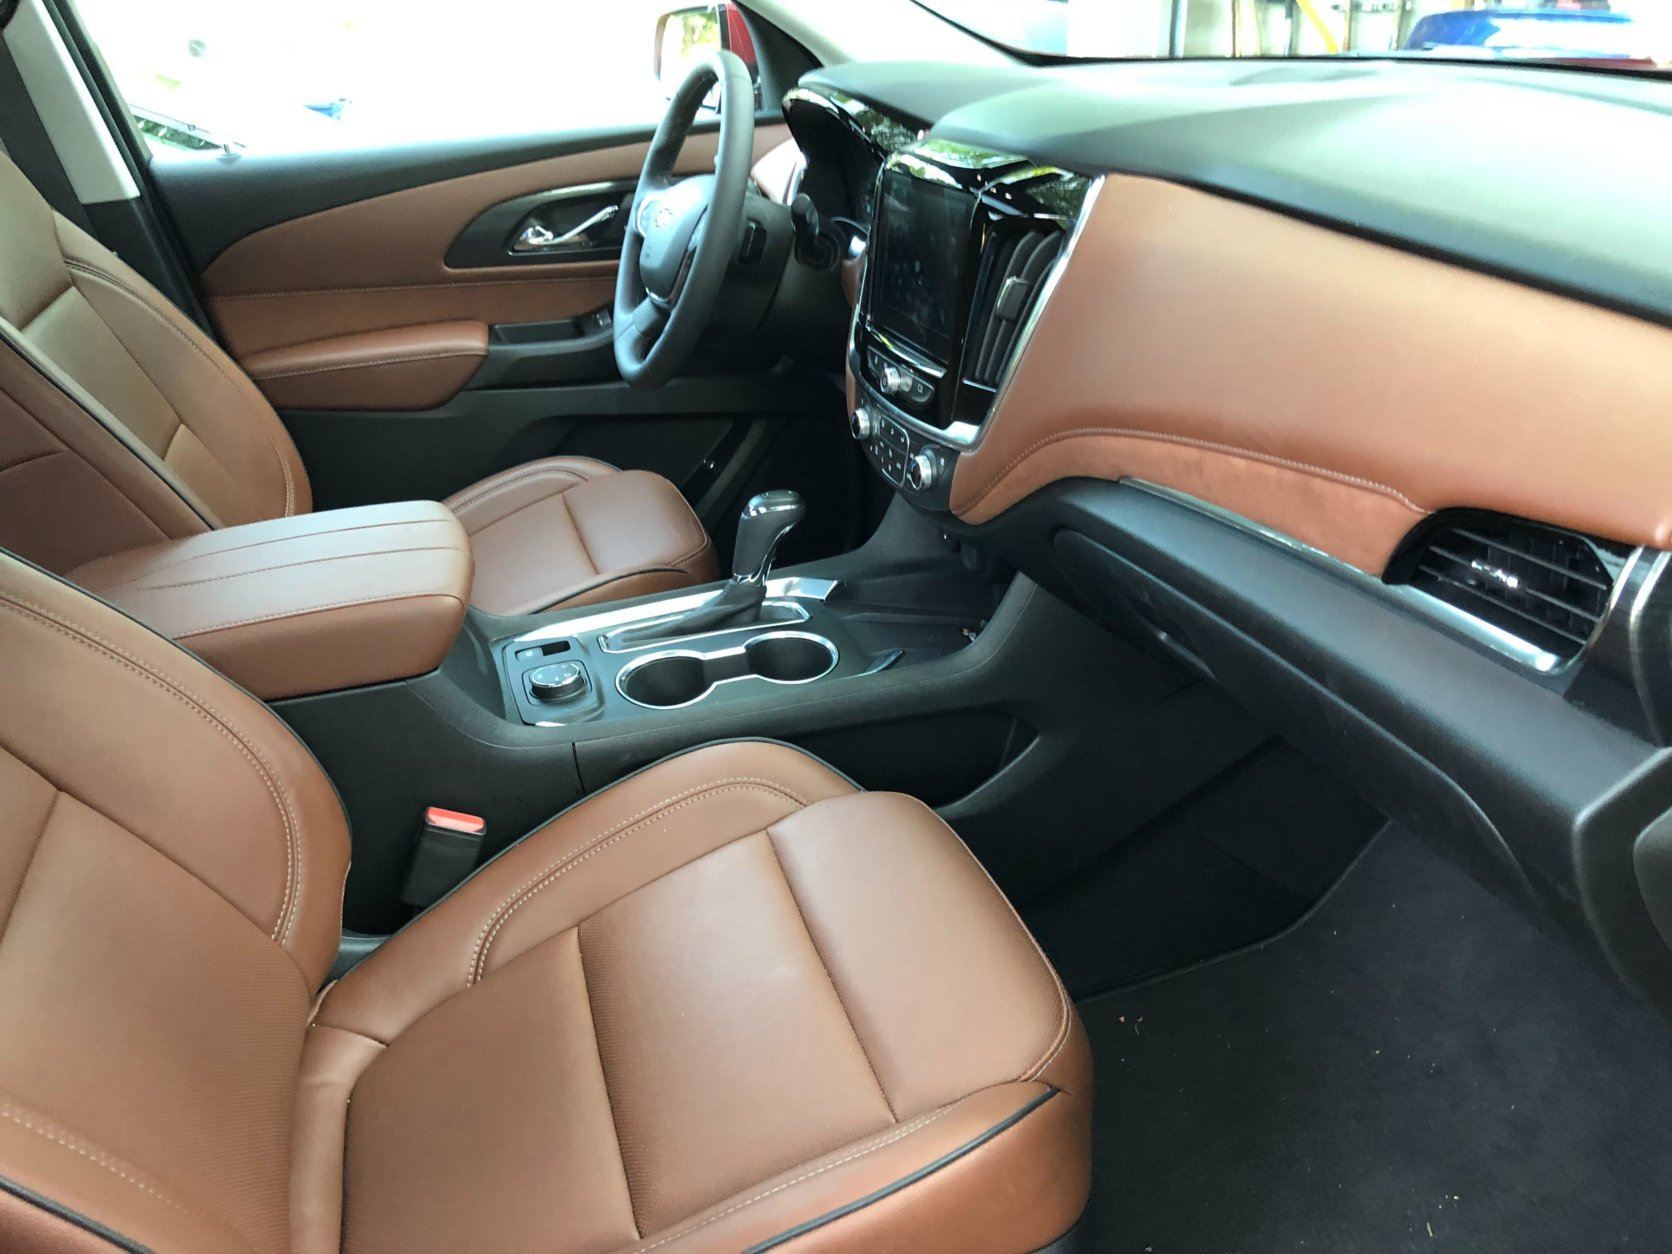 <p>The front seats are heated and ventilated with power adjustments for driver and passenger. There’s marked improvement with leather quality that’s more upscale than before.</p>
